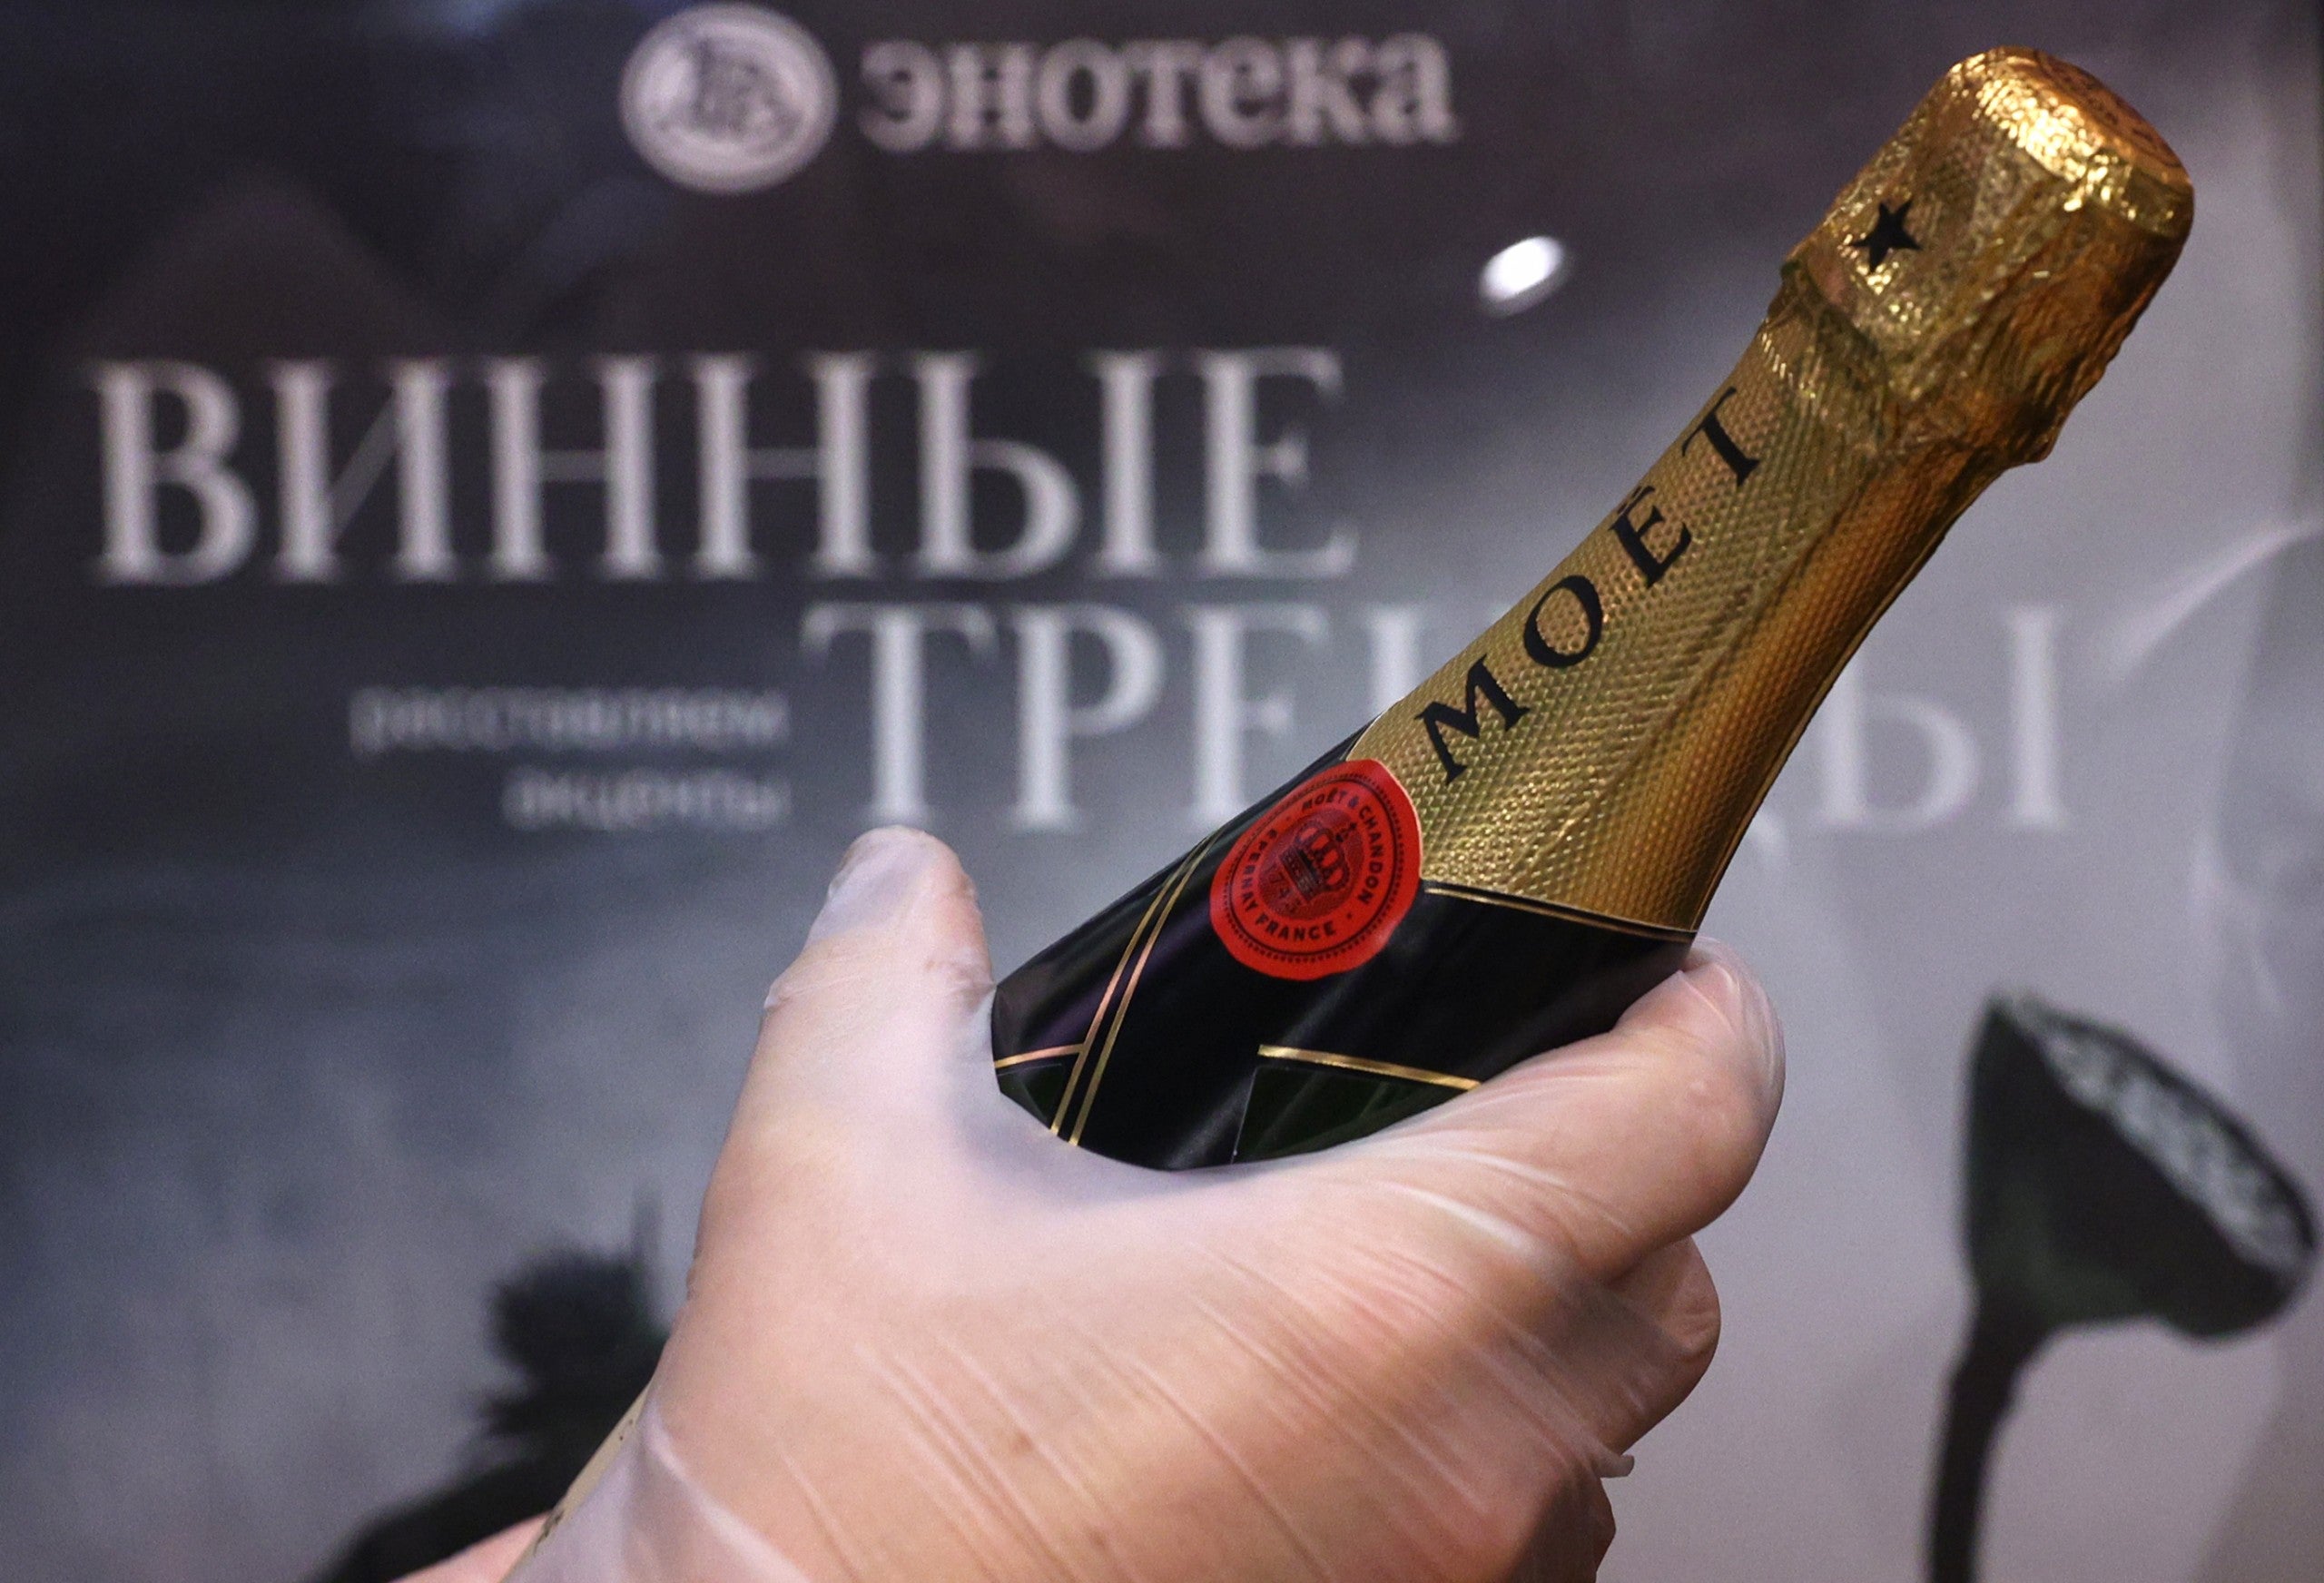 Moet Hennessy to add 'sparkling wine' label to champagne for